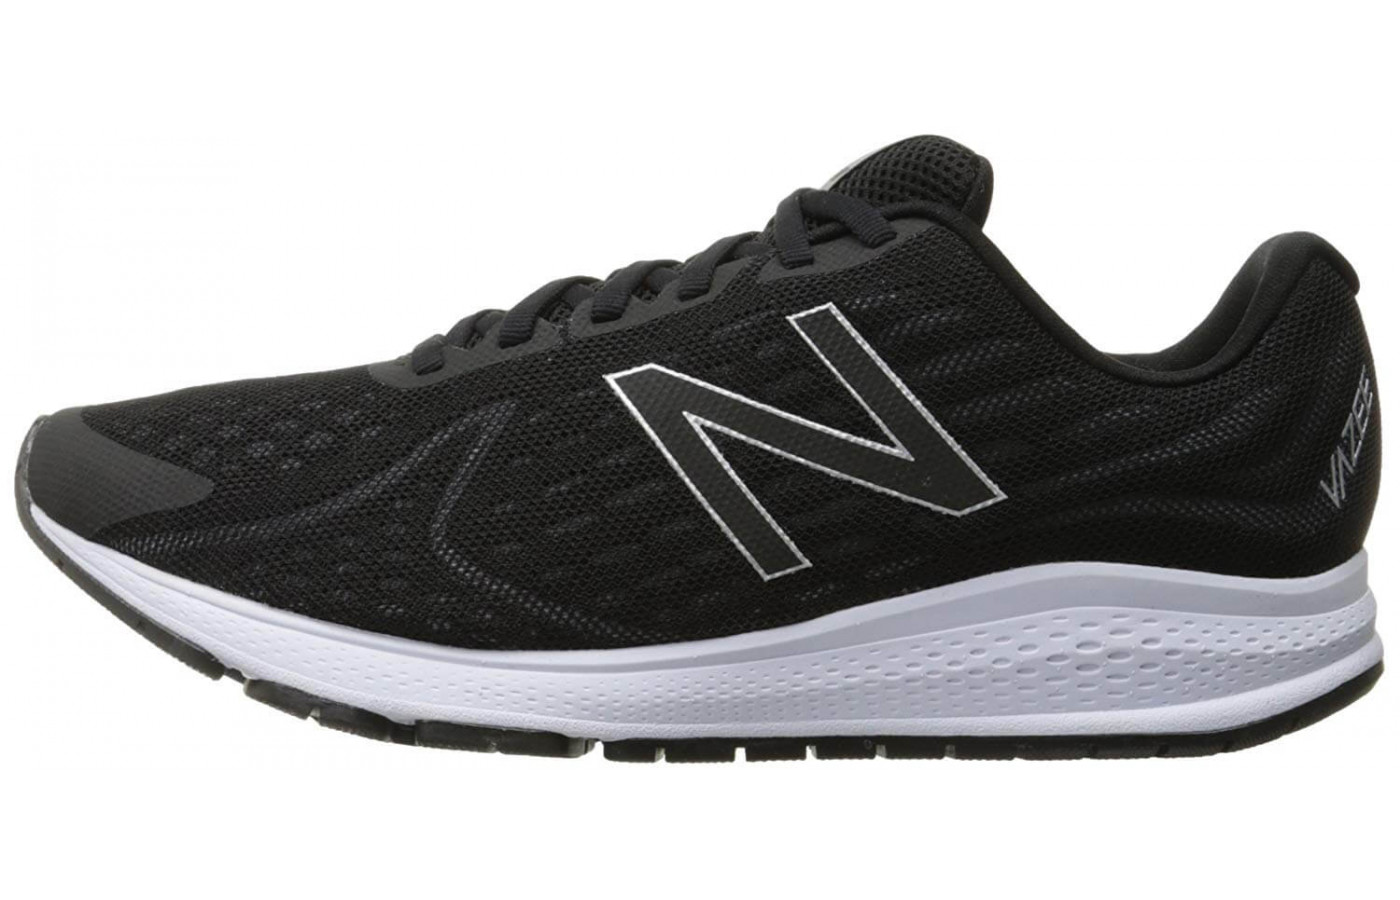 New Balance Vazee Rush v2 Review - To buy or not in 2023 - StripeFit